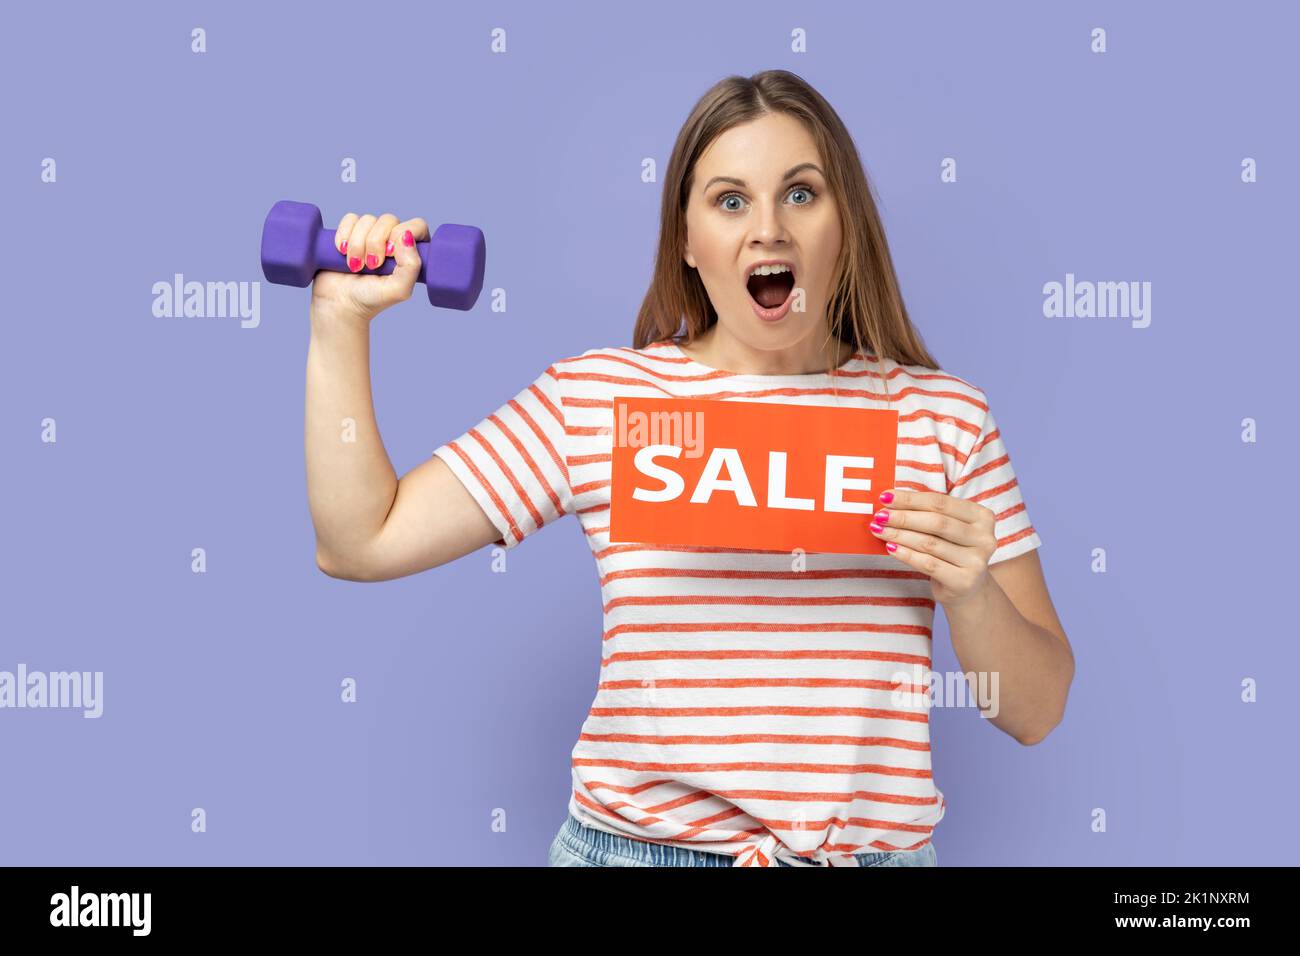 Portrait of amazed excited blond woman wearing striped T-shirt holding card with sale inscription and raised dumbbell, discounts for fitness workout. Indoor studio shot isolated on purple background. Stock Photo